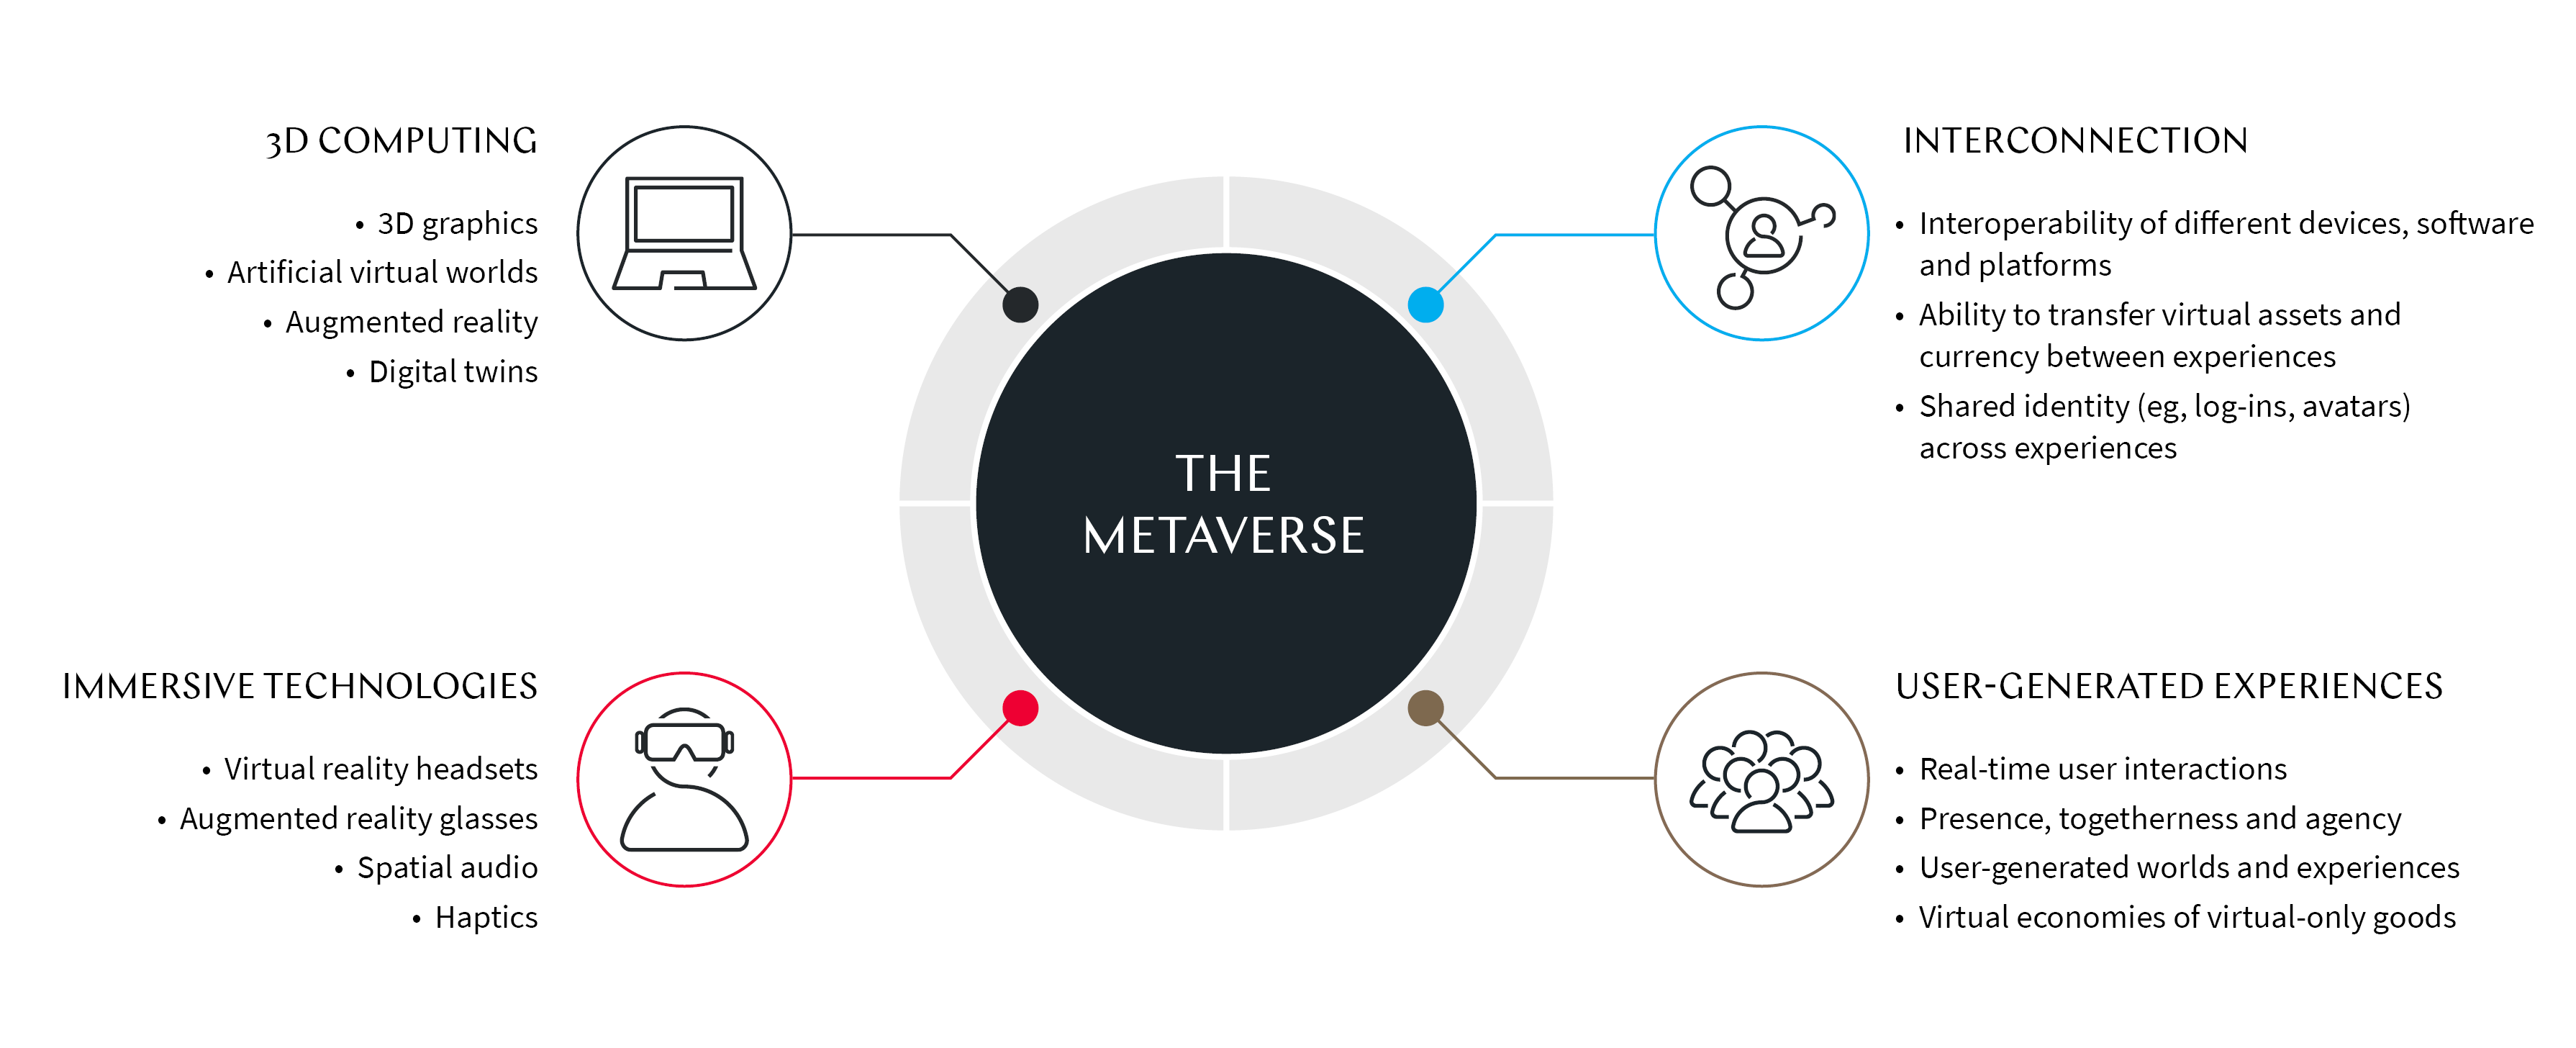 Minecraft, Roblox lead way to Internet's next stop: the Metaverse